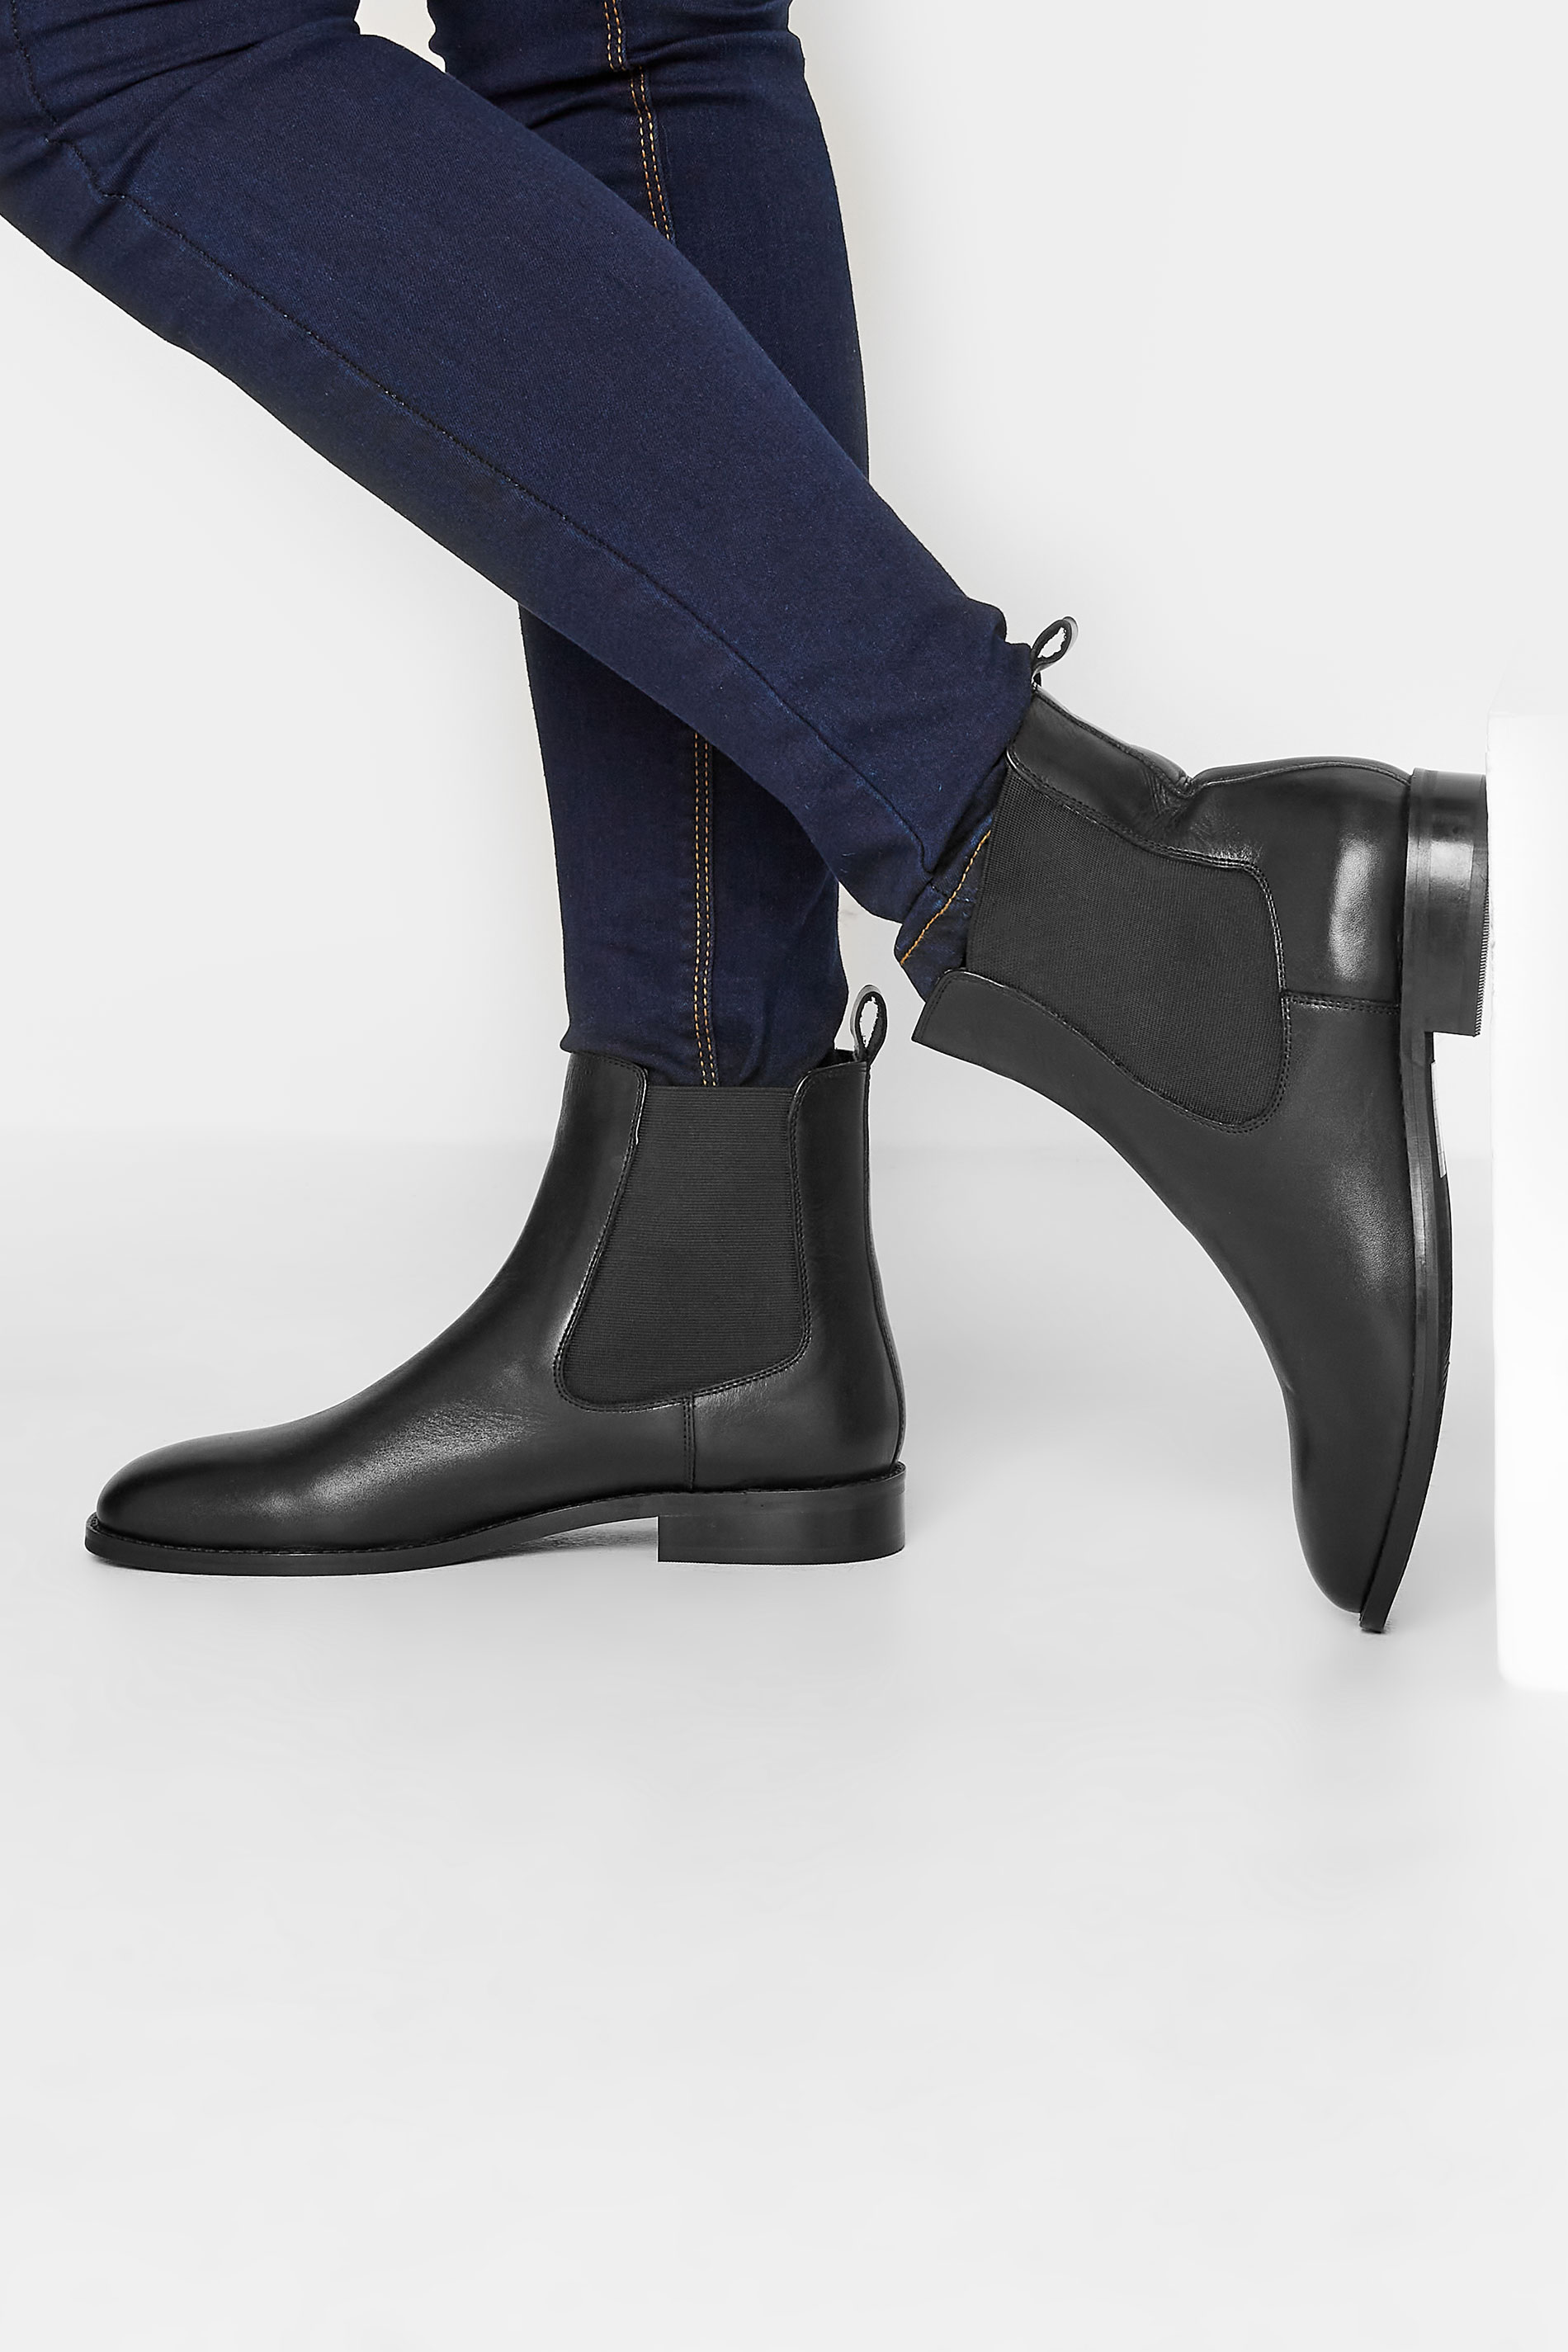 Lts Black Leather Chelsea Boots In Standard Fit Standard > 11 Lts | Tall Women's Chelsea Boots